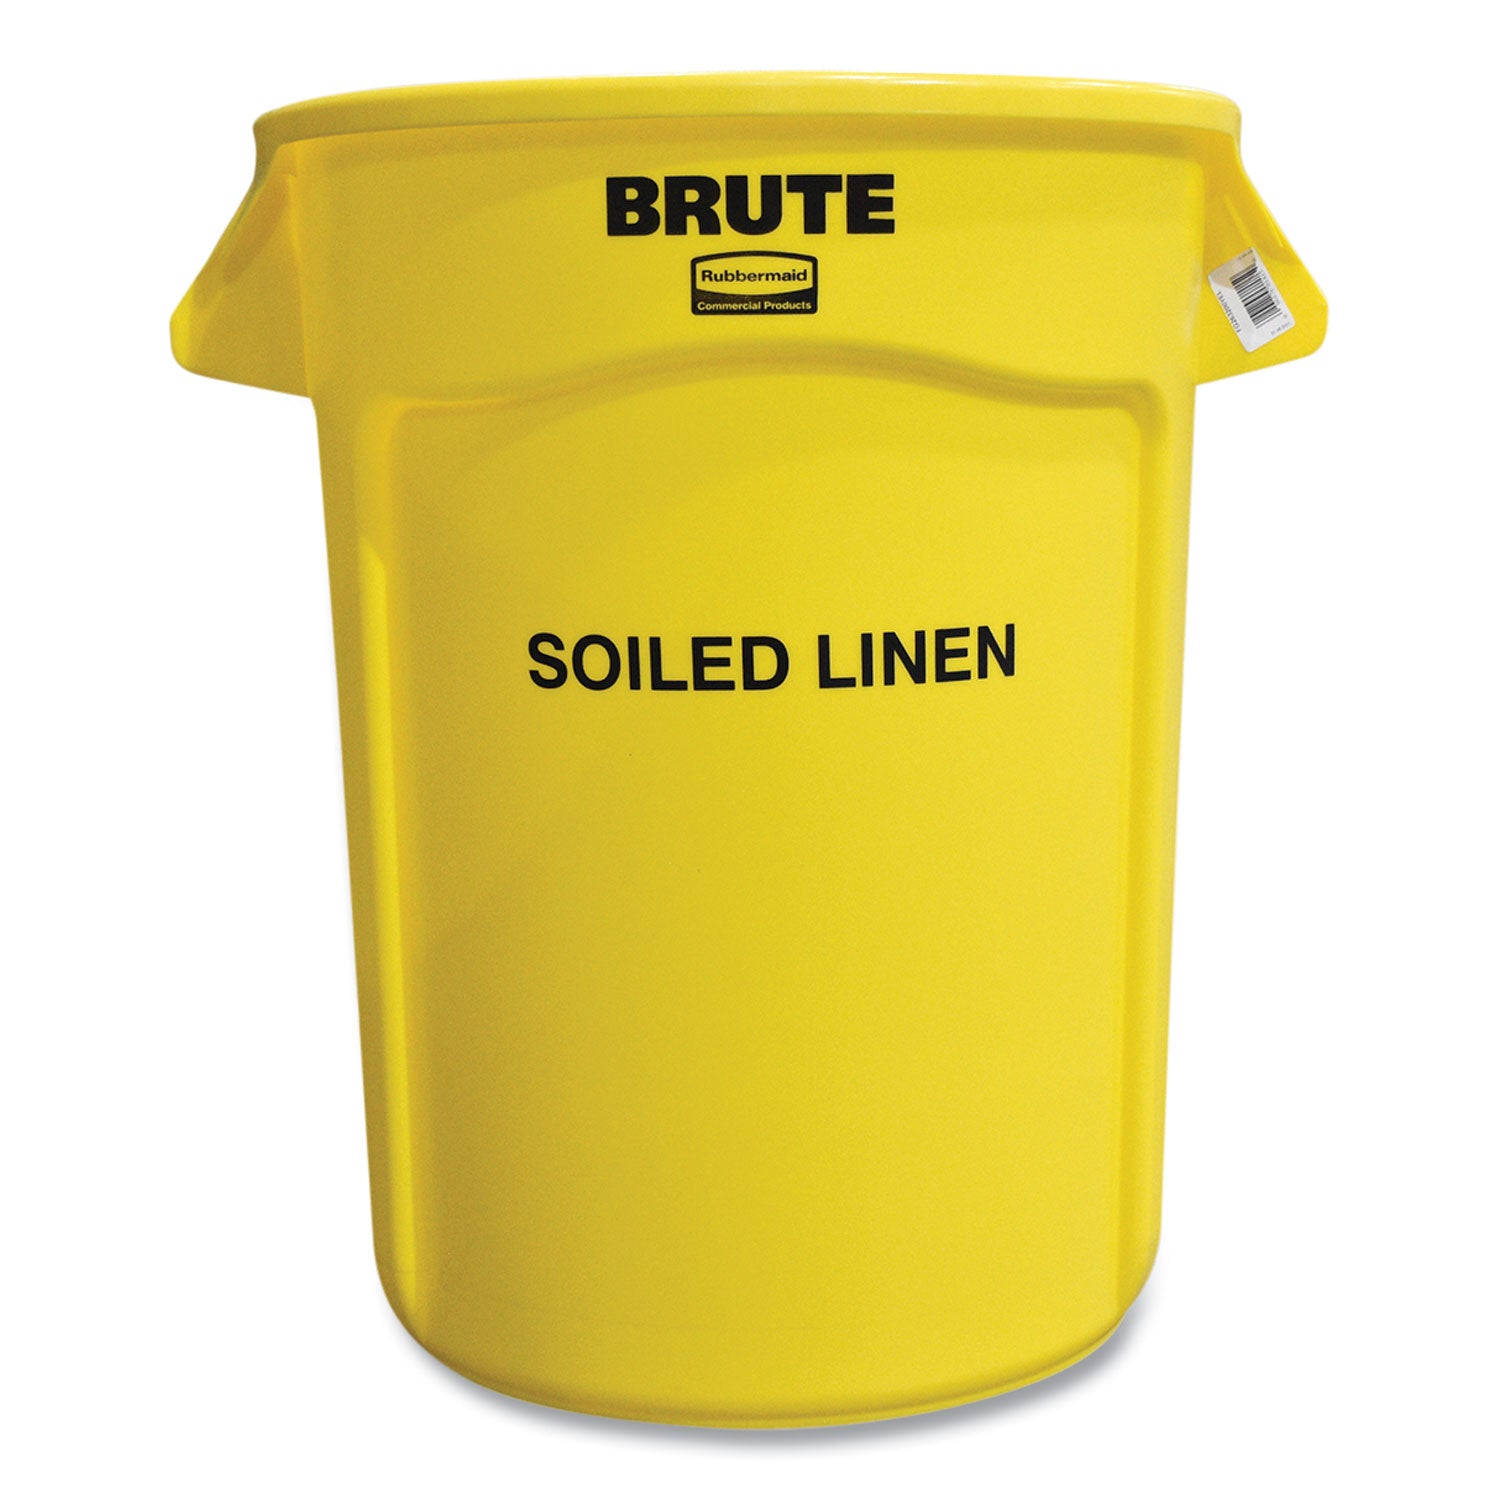 vented-round-brute-container-soiled-linen-imprint-32-gal-plastic-yellow_rcp263294yel - 1